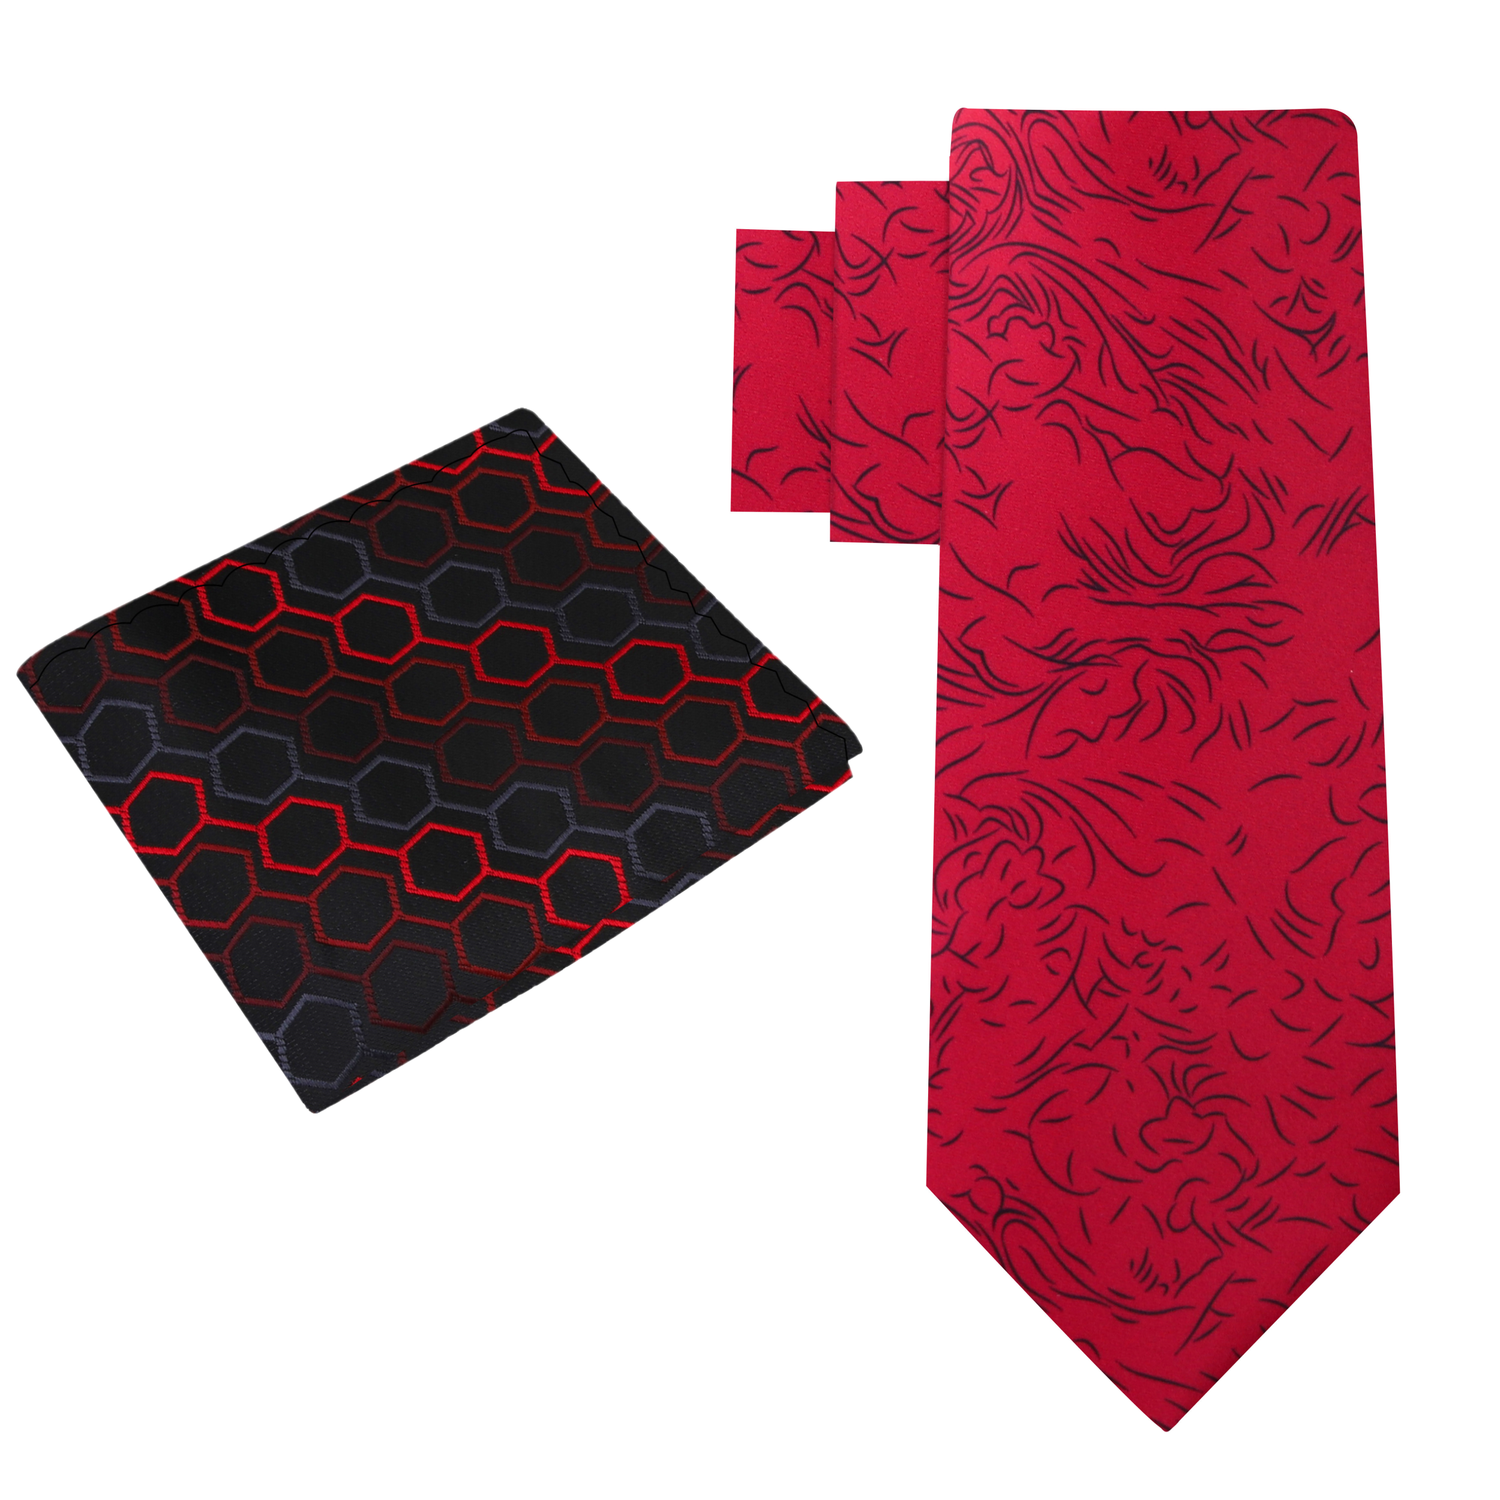 Alt View: Bright Red and Black Abstract Lines Tie and Black and Red Geometric Square